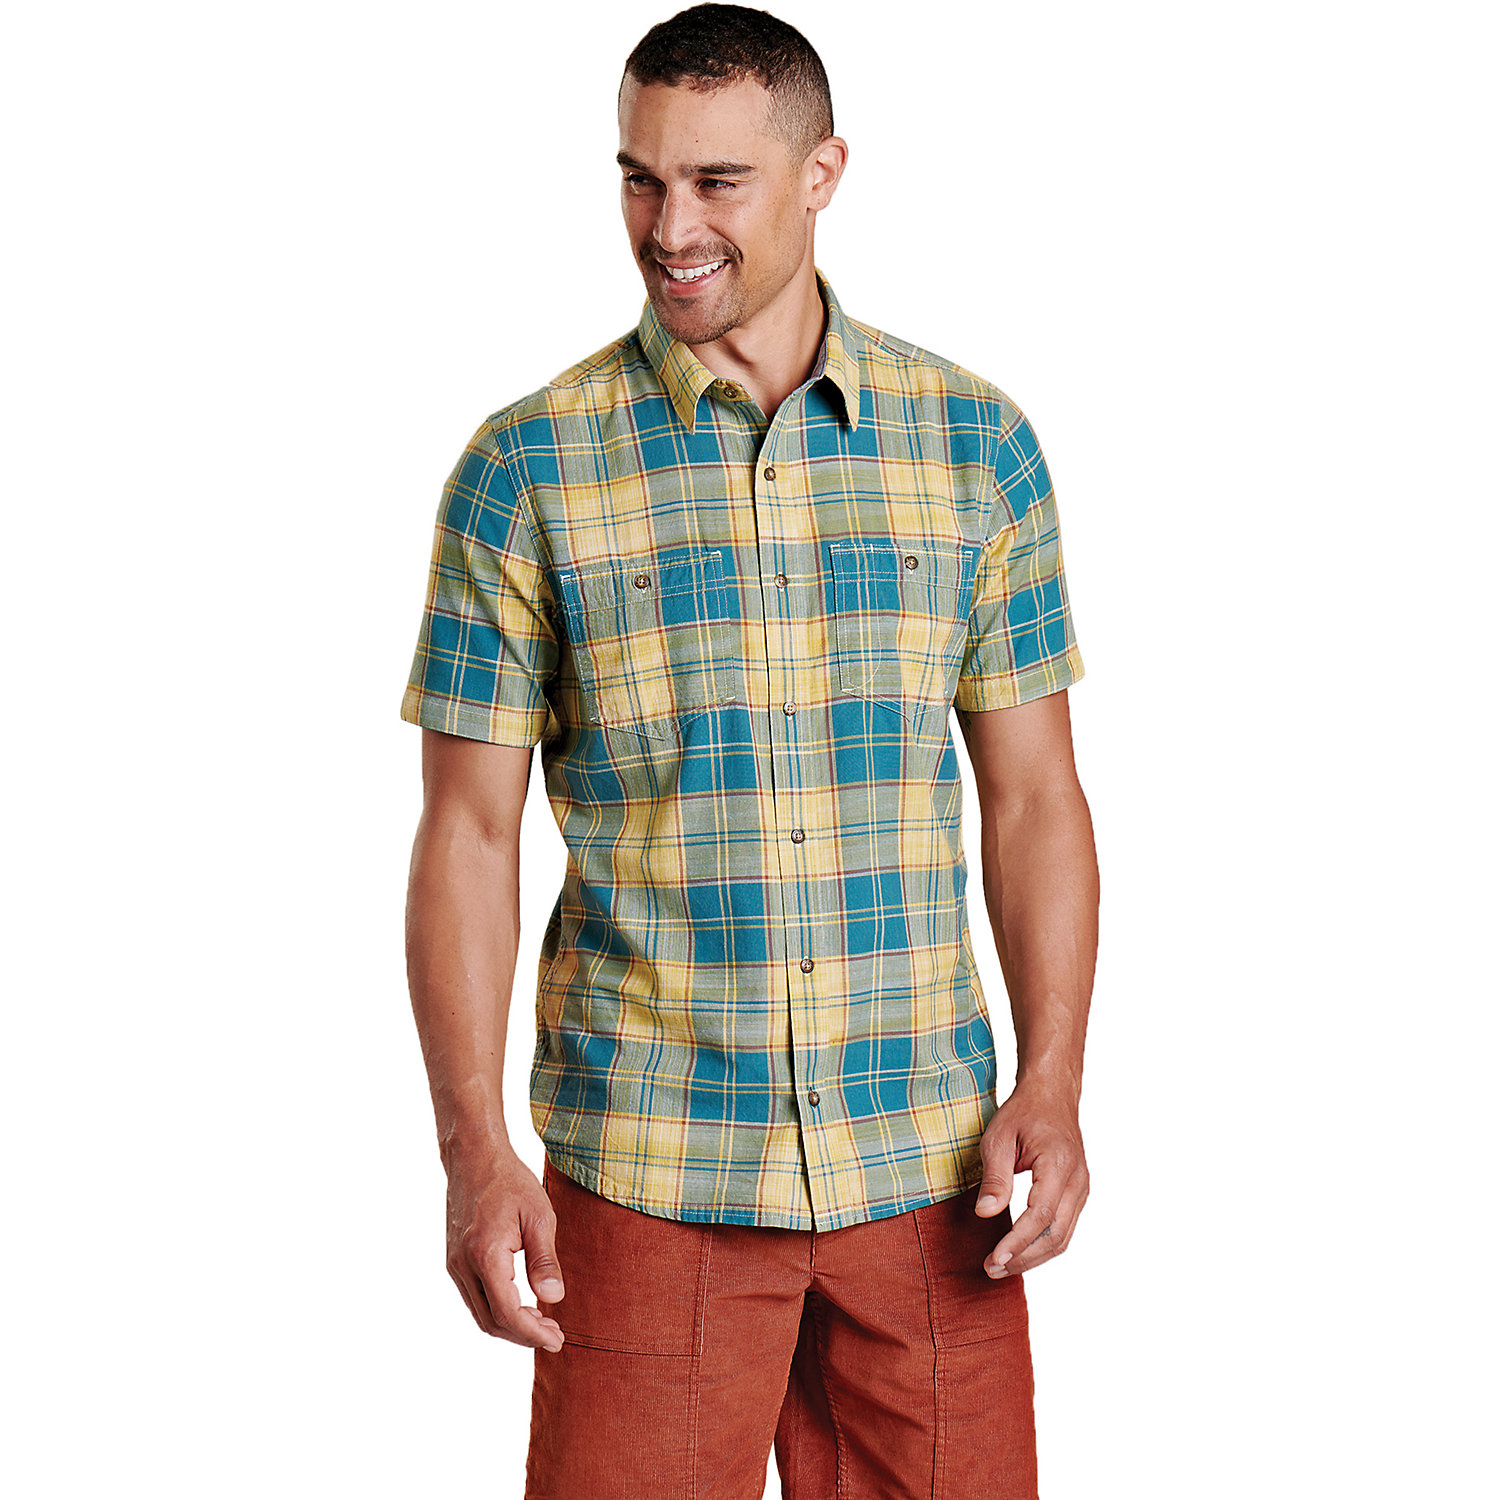 Toad & Co Mens Smythy SS Shirt